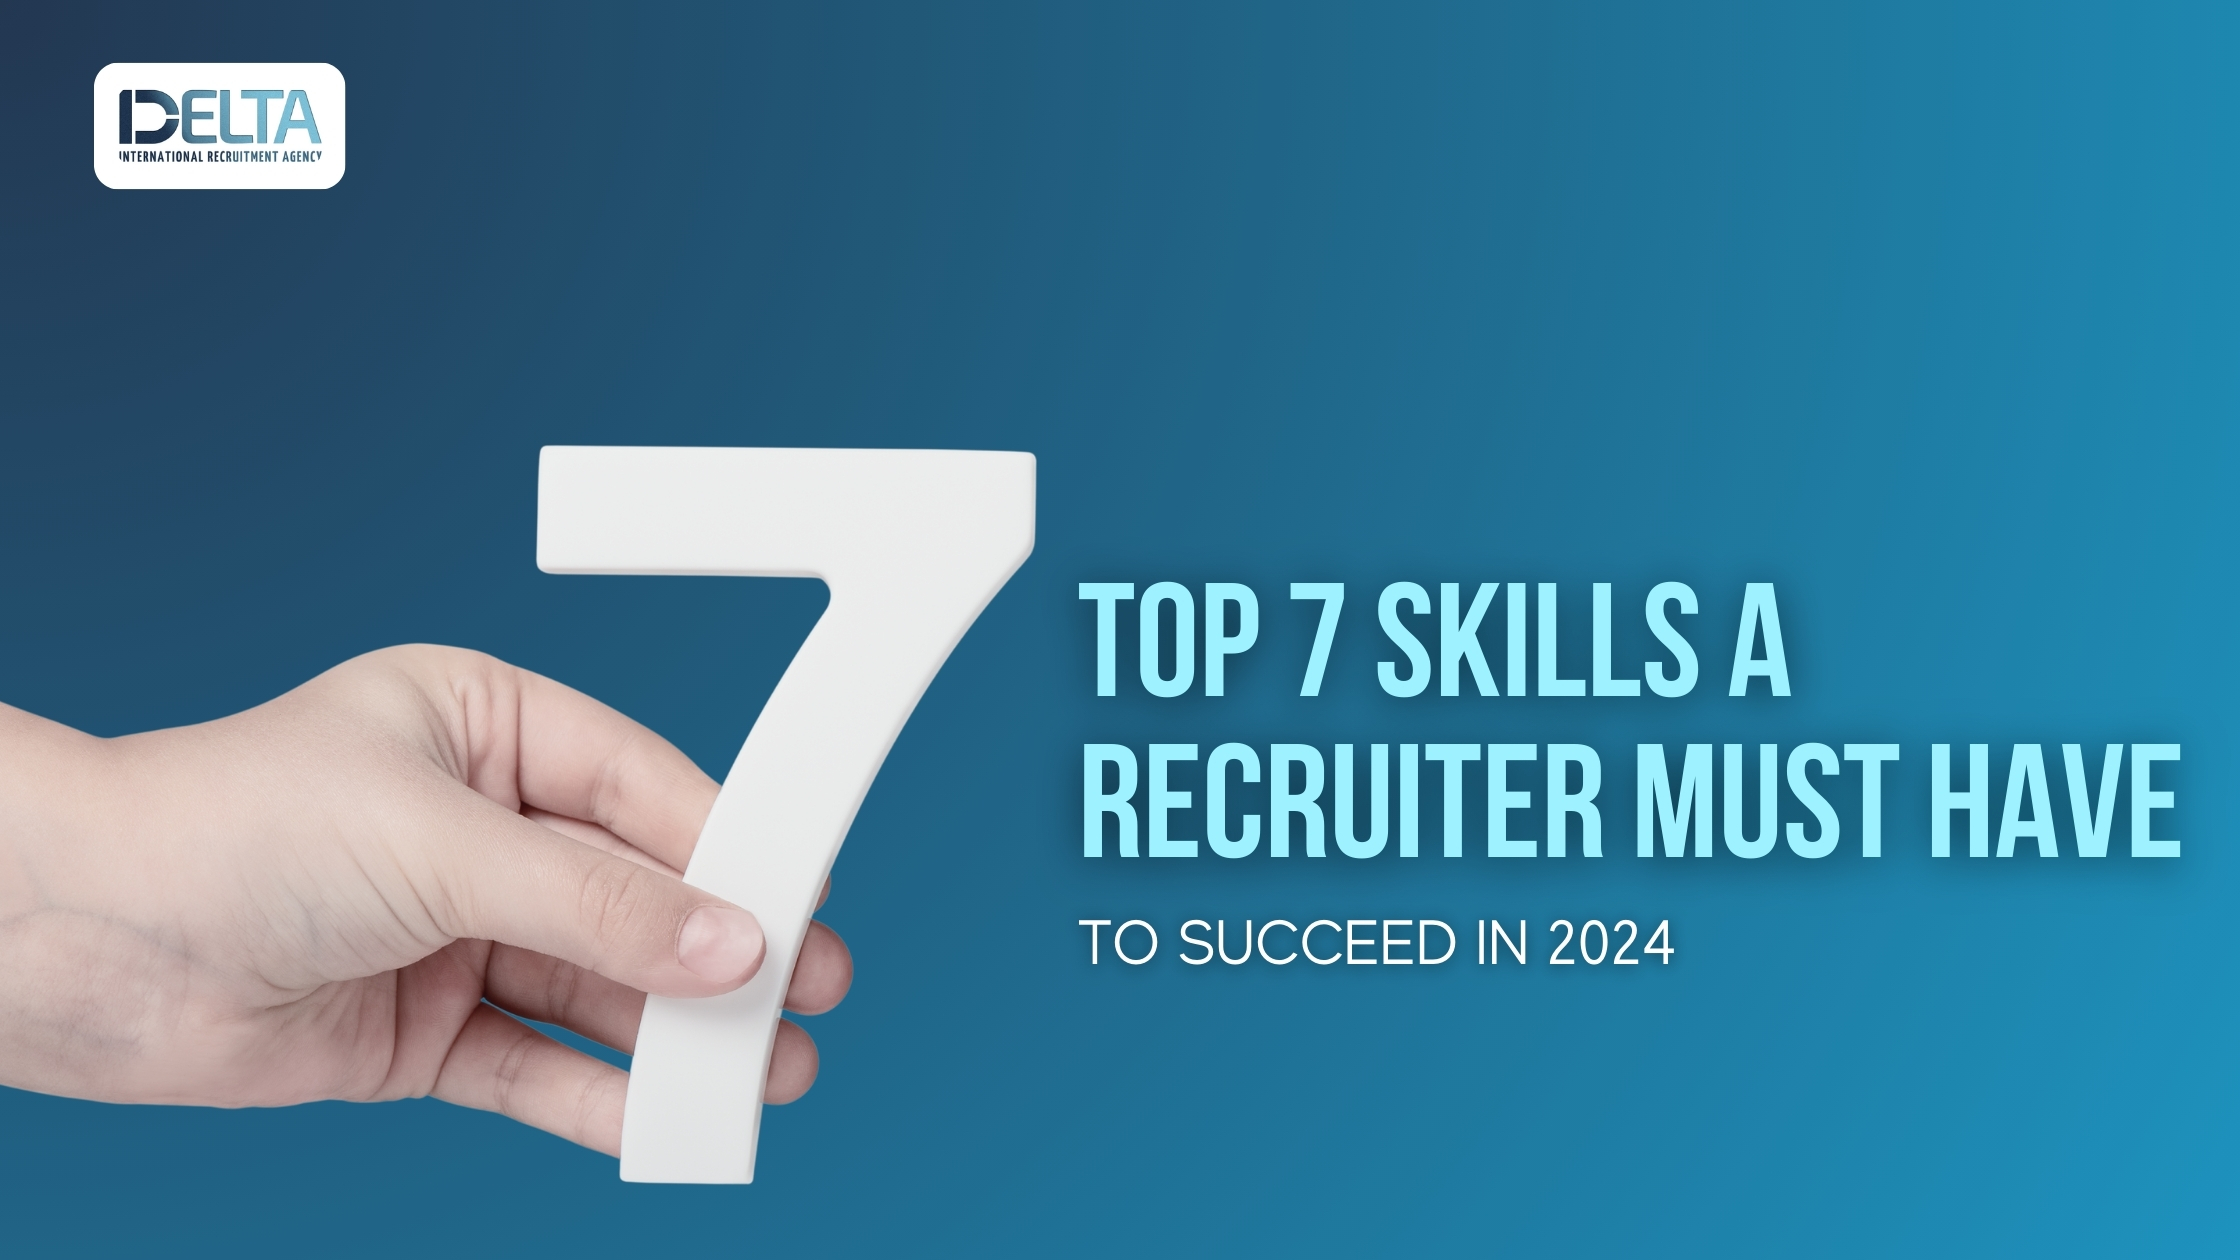 Top 7 Skills a Recruiter Must Have to Succeed in 2024